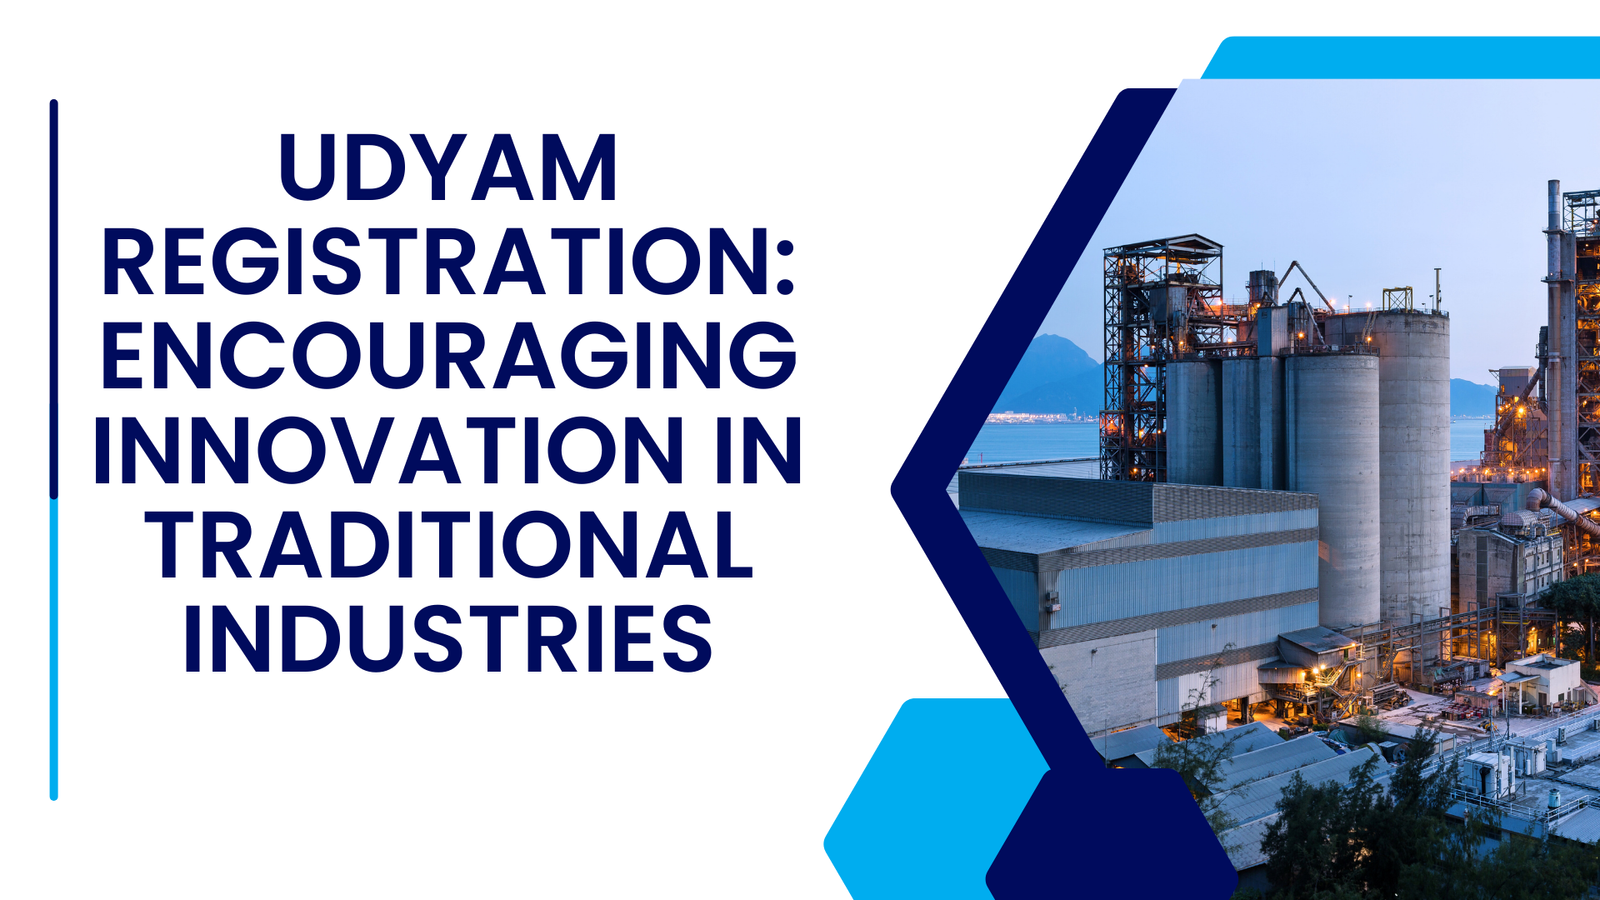 Udyam Registration: Encouraging Innovation in Traditional Industries